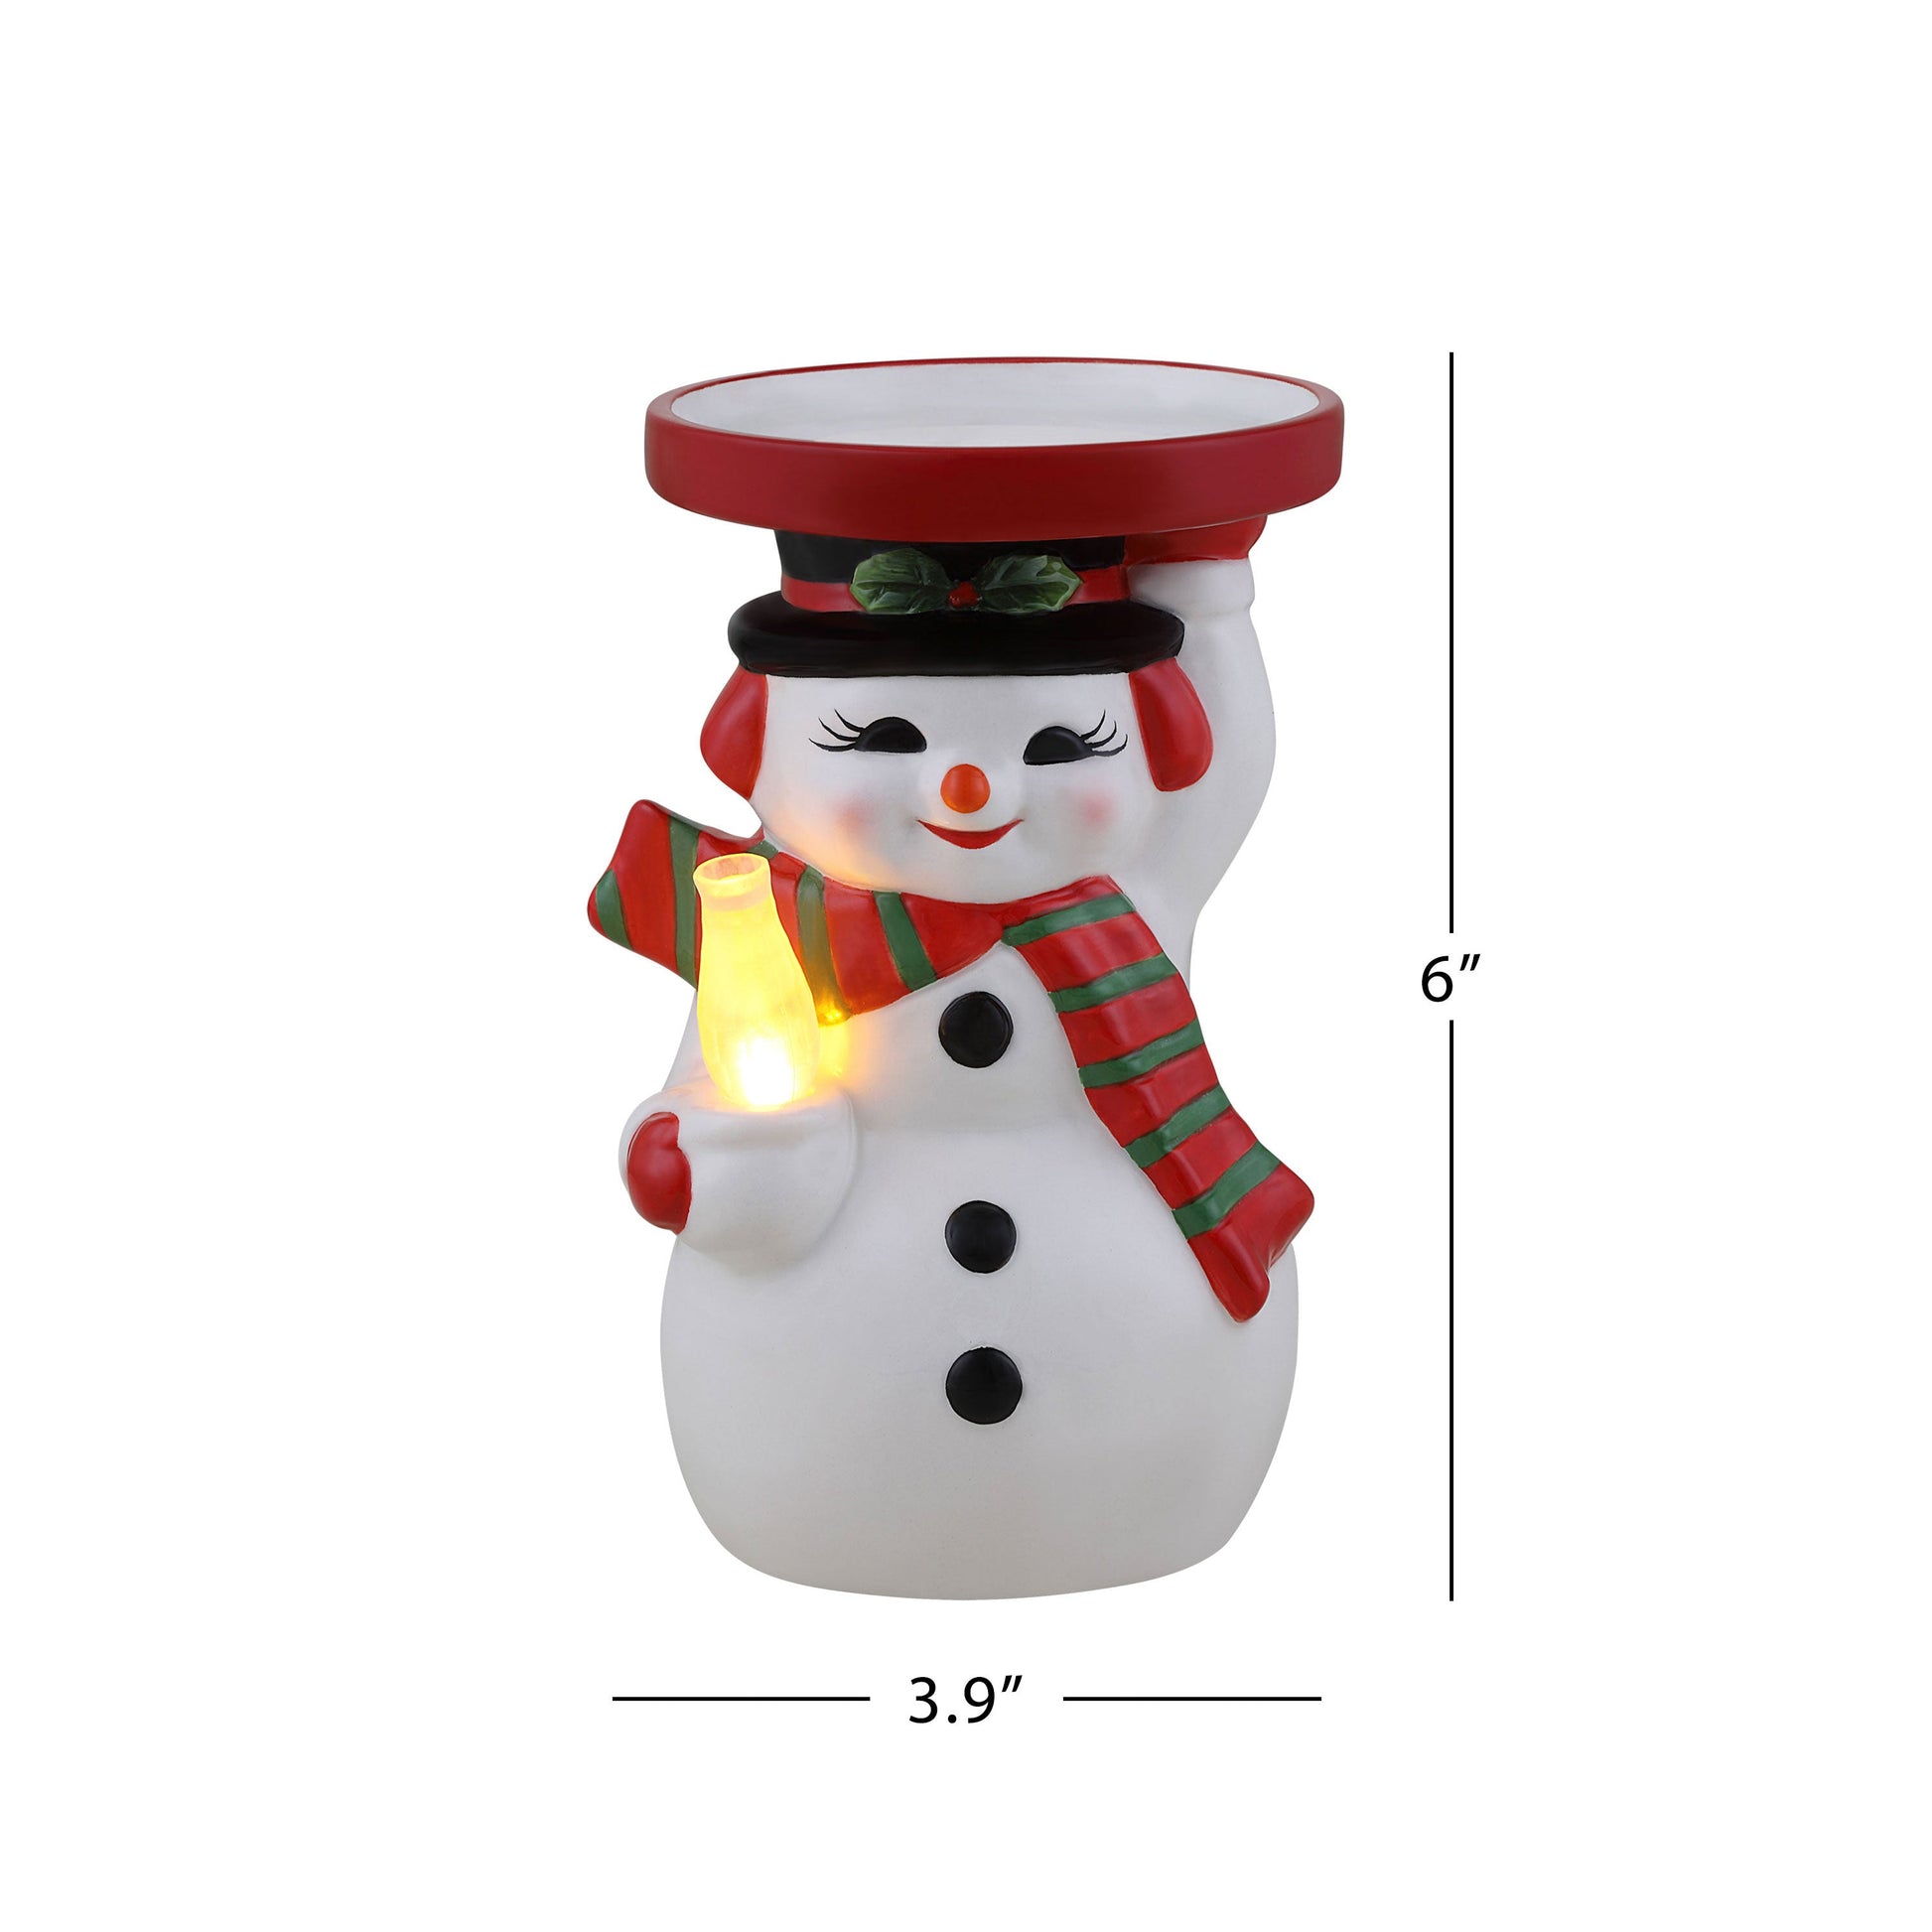 6" Ceramic Lit Snowman Candle Holder and Flameless Candle - Mr. Christmas